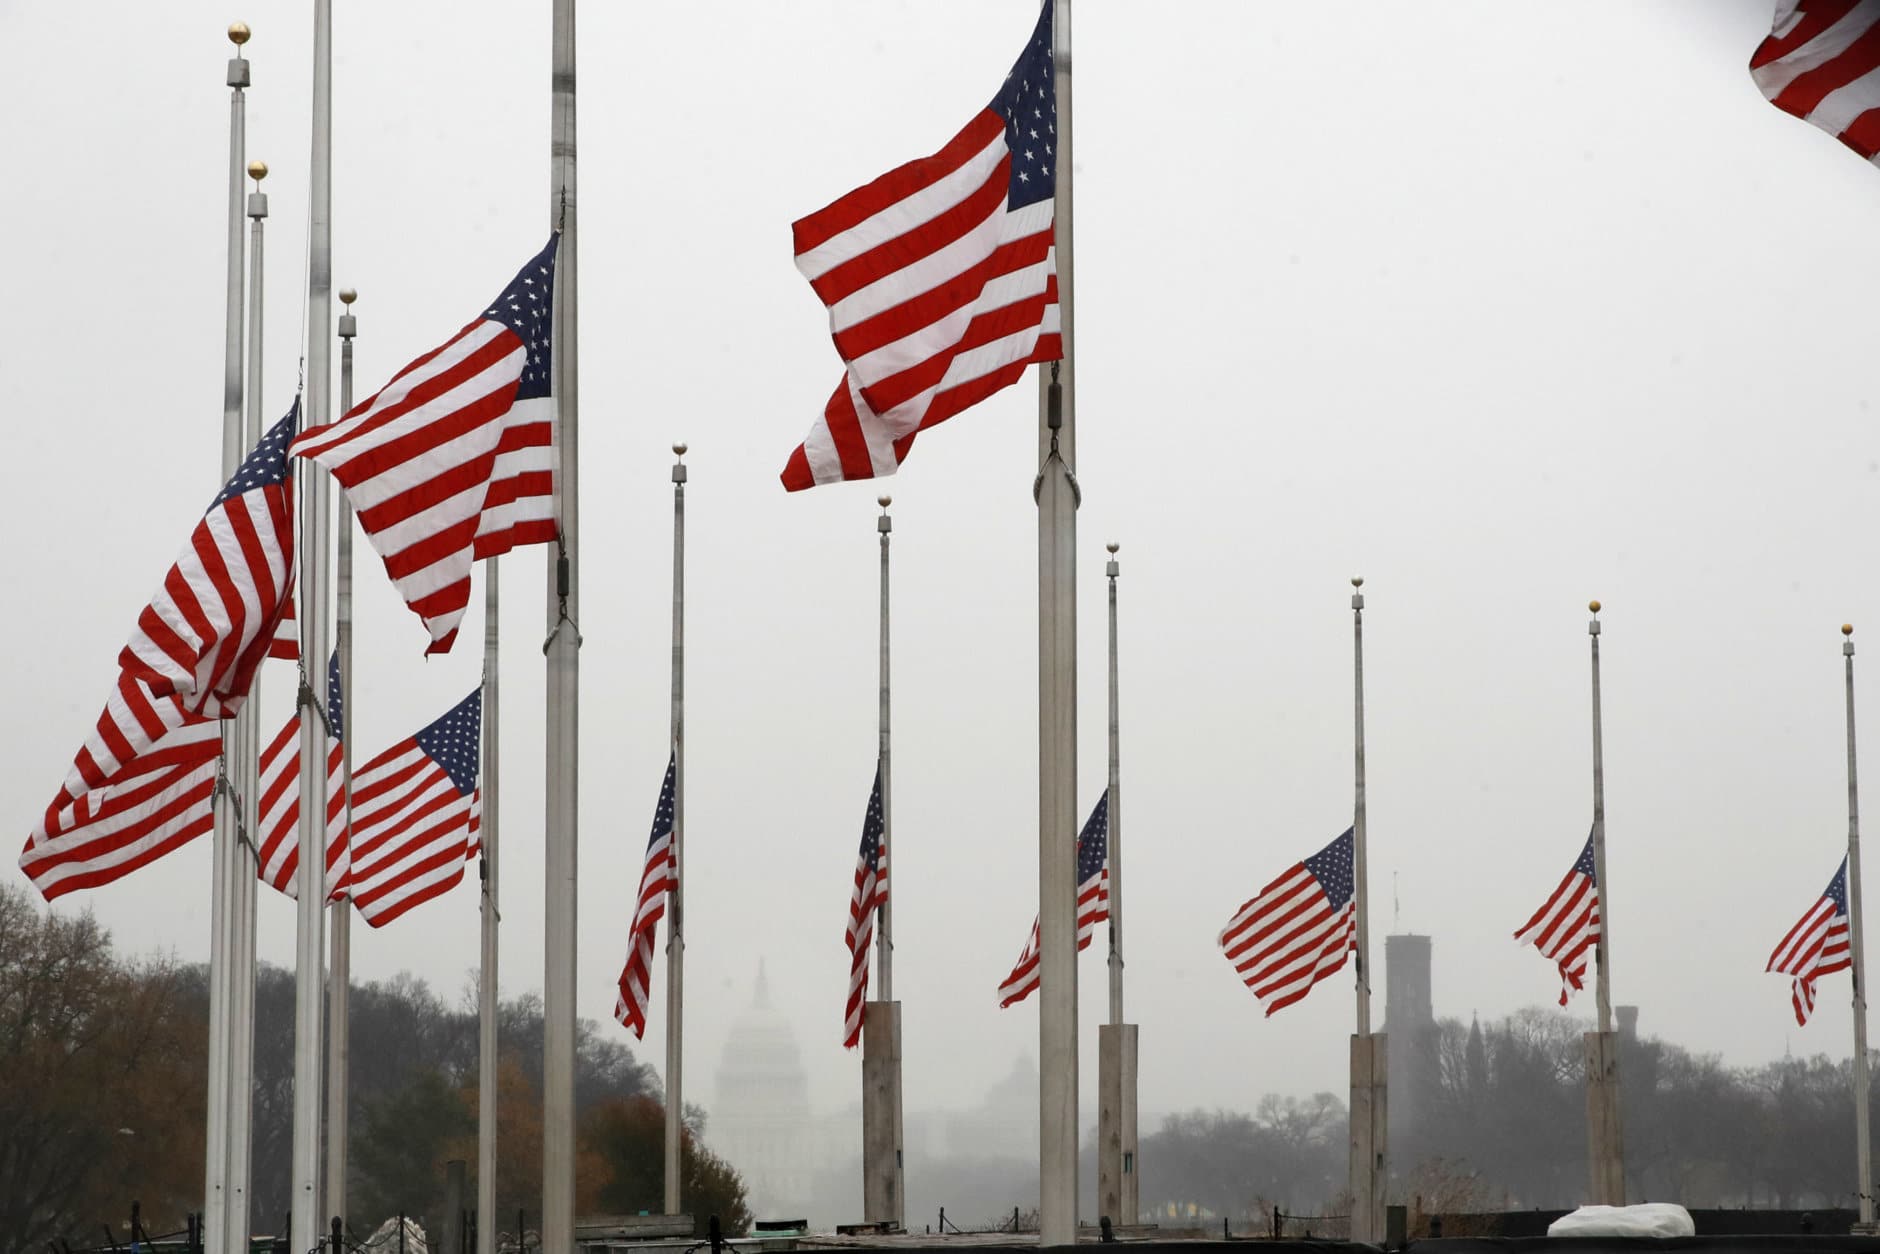 With a misty U.S. Capitol in the distance, the American flags surrounding the Washington Monument fly at half-staff, Saturday, Dec. 1, 2018, in Washington, after President Donald Trump directed that American flags be flown at half-staff for 30 days to honor the memory of former President George H.W. Bush. (AP Photo/Jacquelyn Martin)